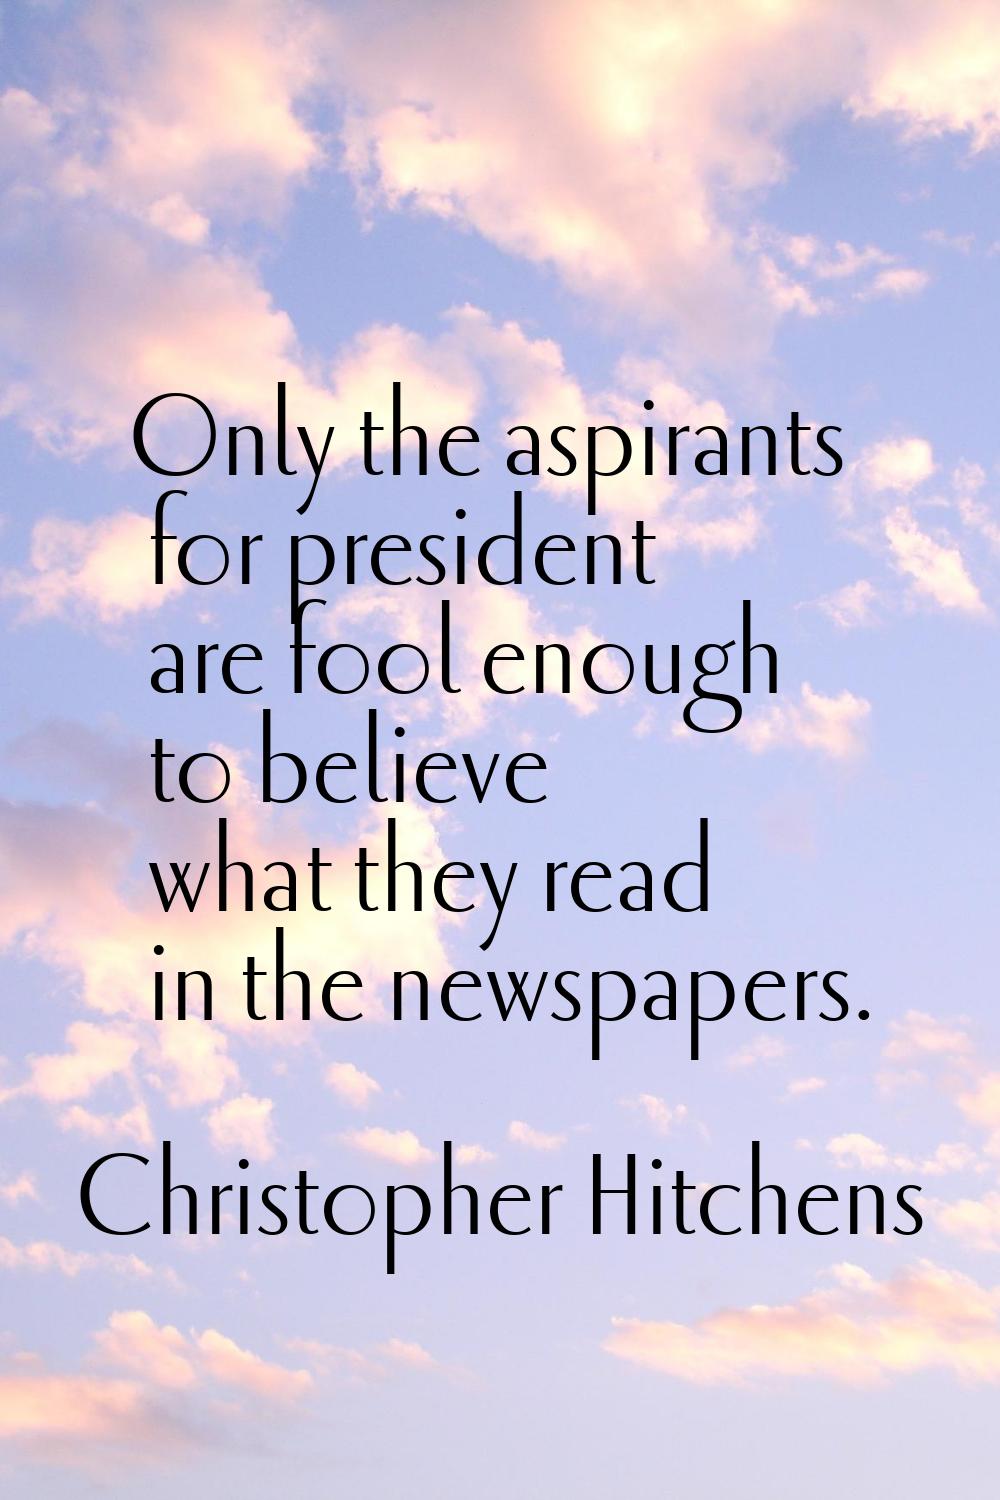 Only the aspirants for president are fool enough to believe what they read in the newspapers.